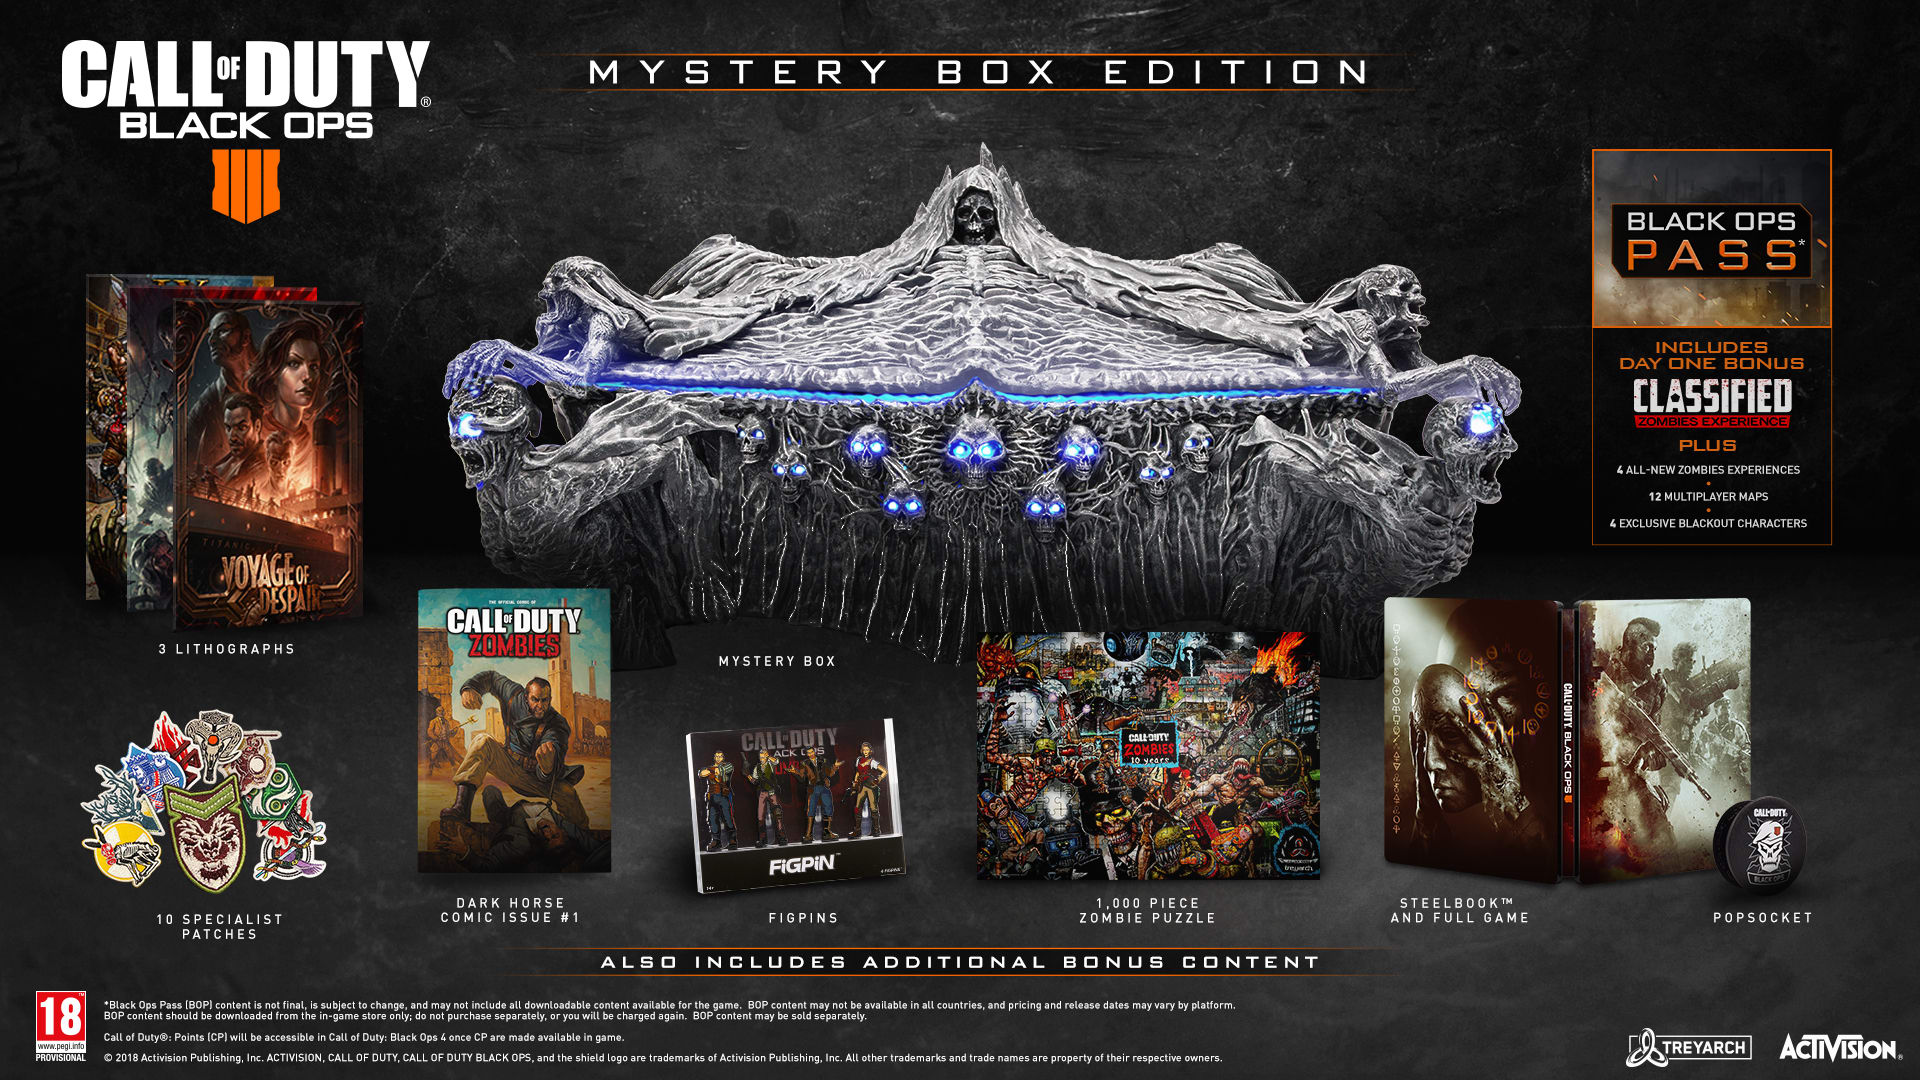 Call of Duty: Black Ops 4 – Mystery Box Edition